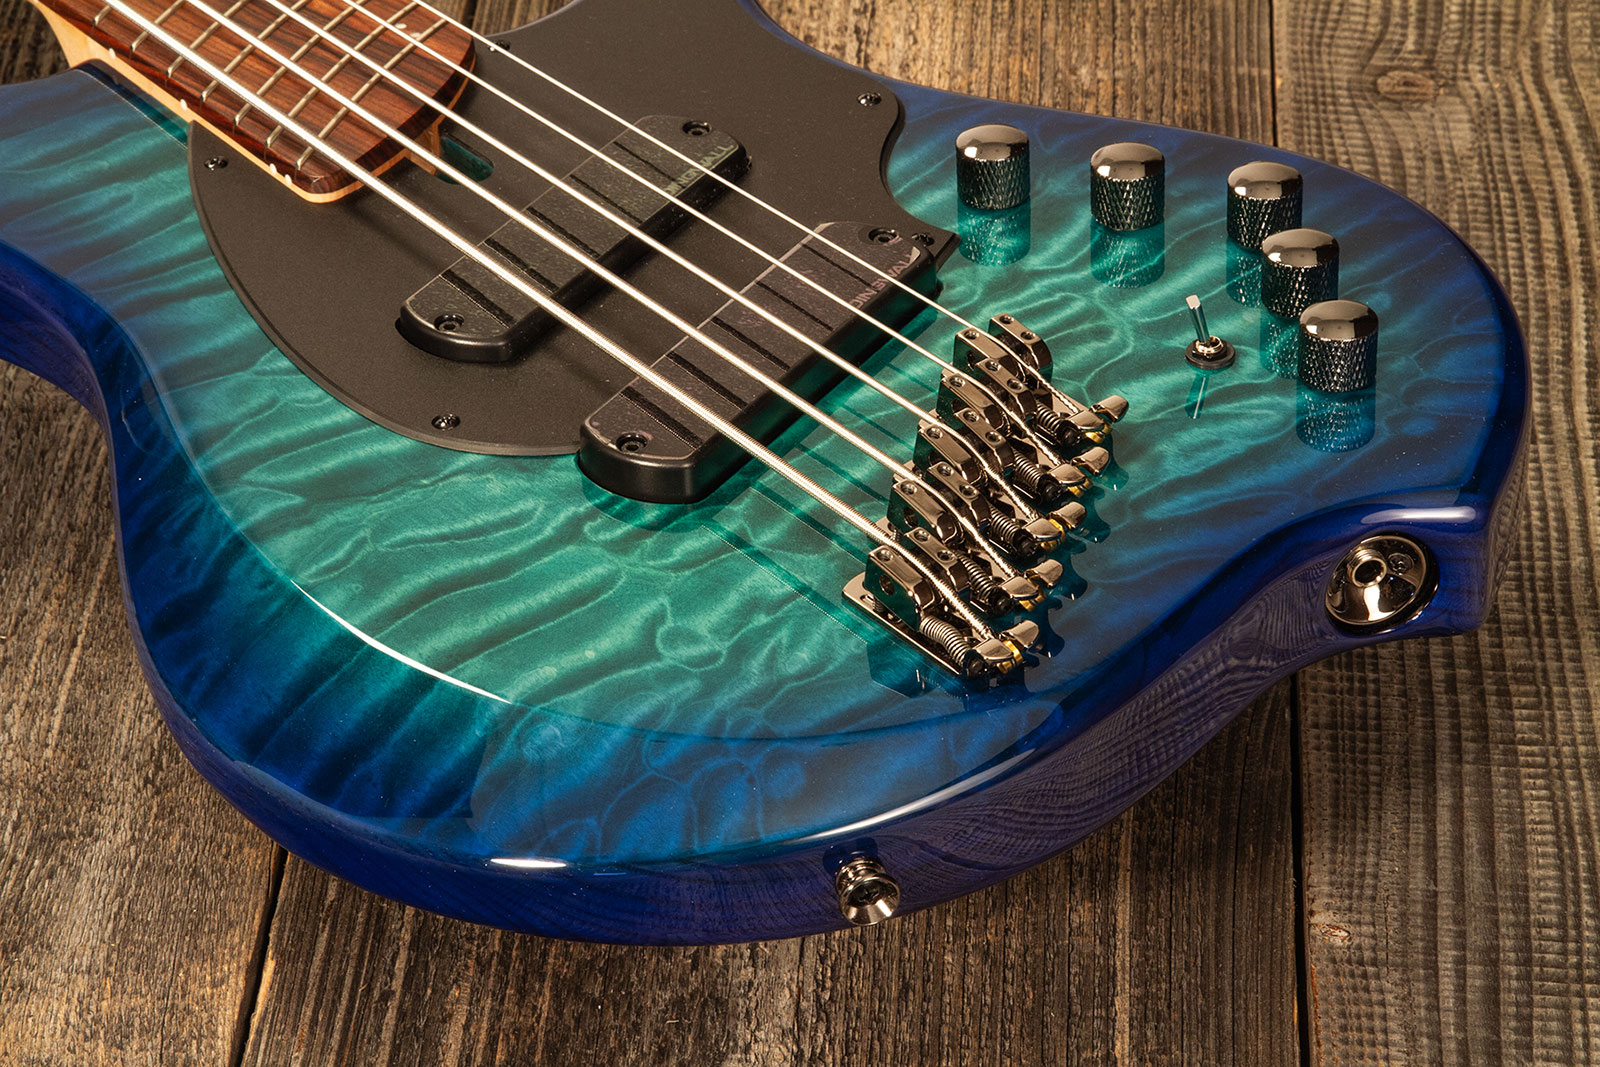 Dingwall Combustion Cb2 5c 2pu Active Pf - Whalepool Burst - Solid body electric bass - Variation 4